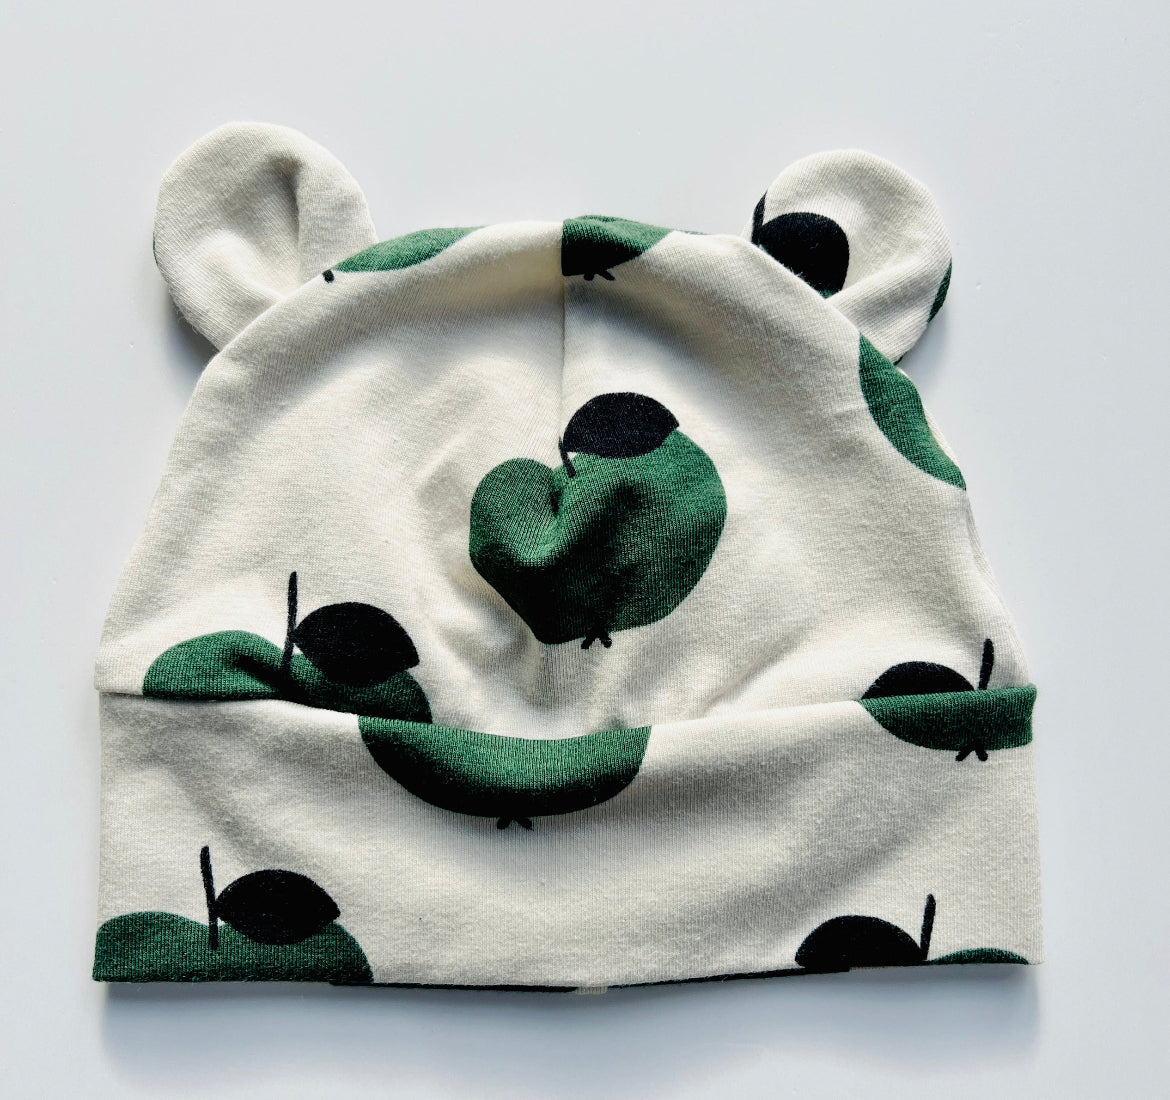 Eddie & Bee organic cotton Baby hat with ears  in Oat "Apple" print.